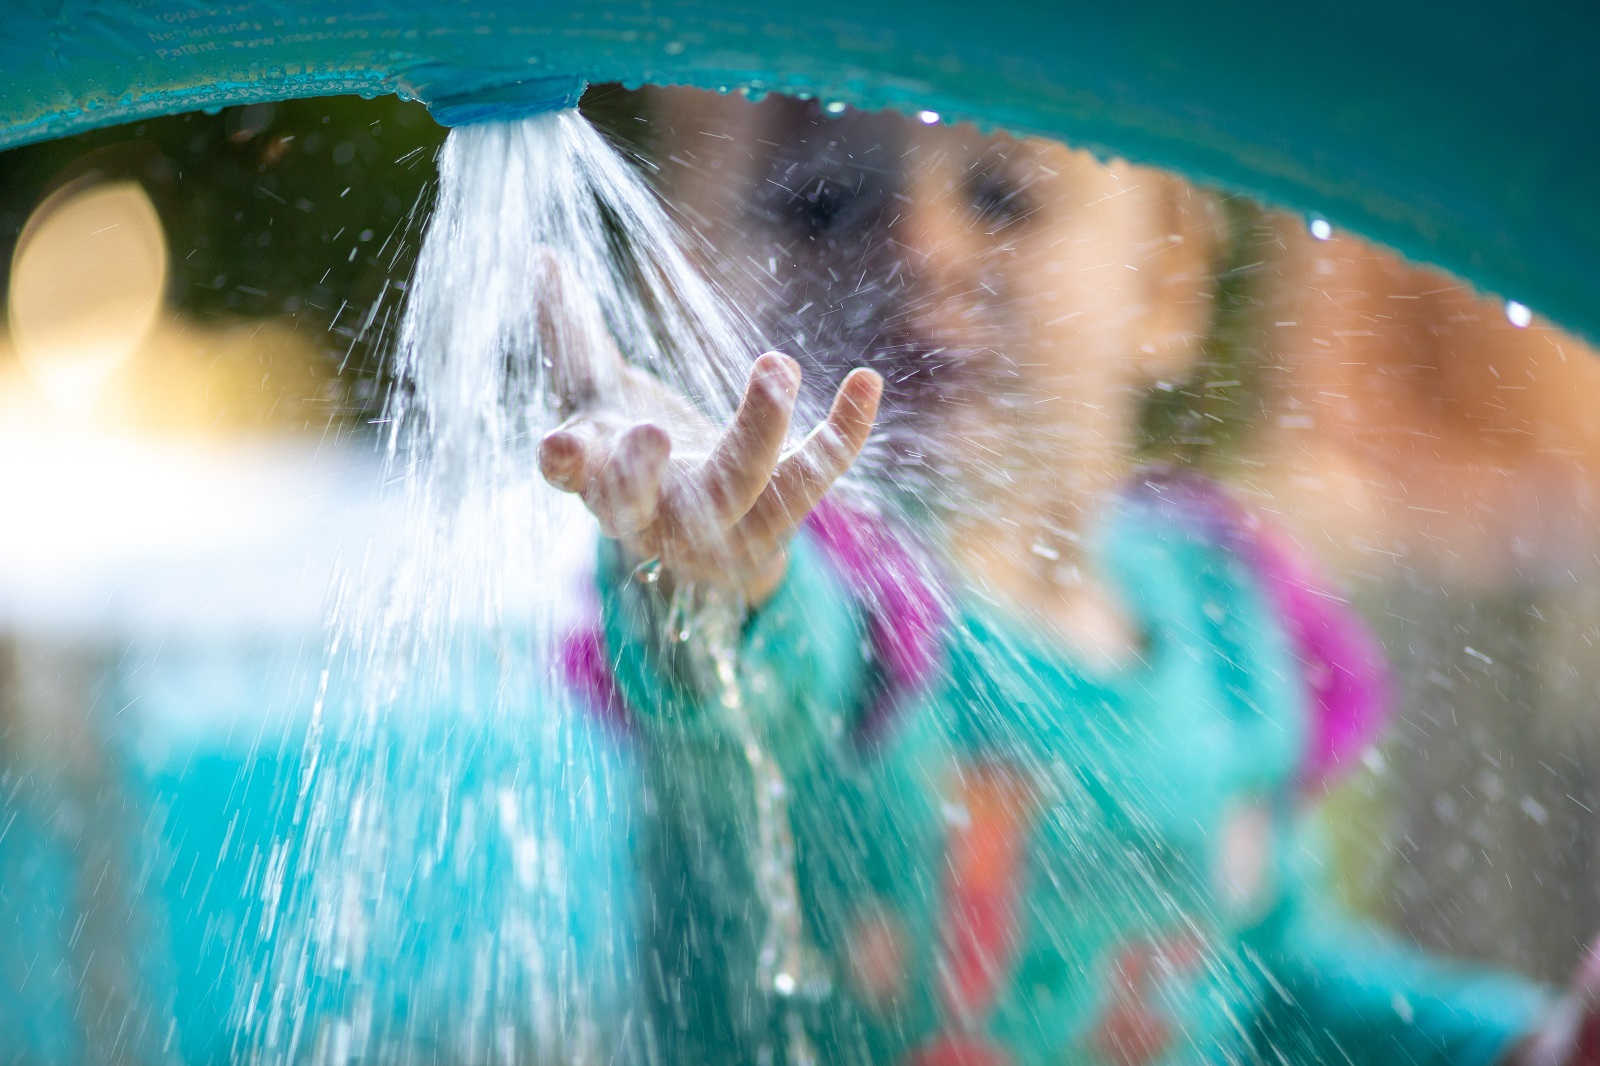 Young children with hand in water spraying from hose